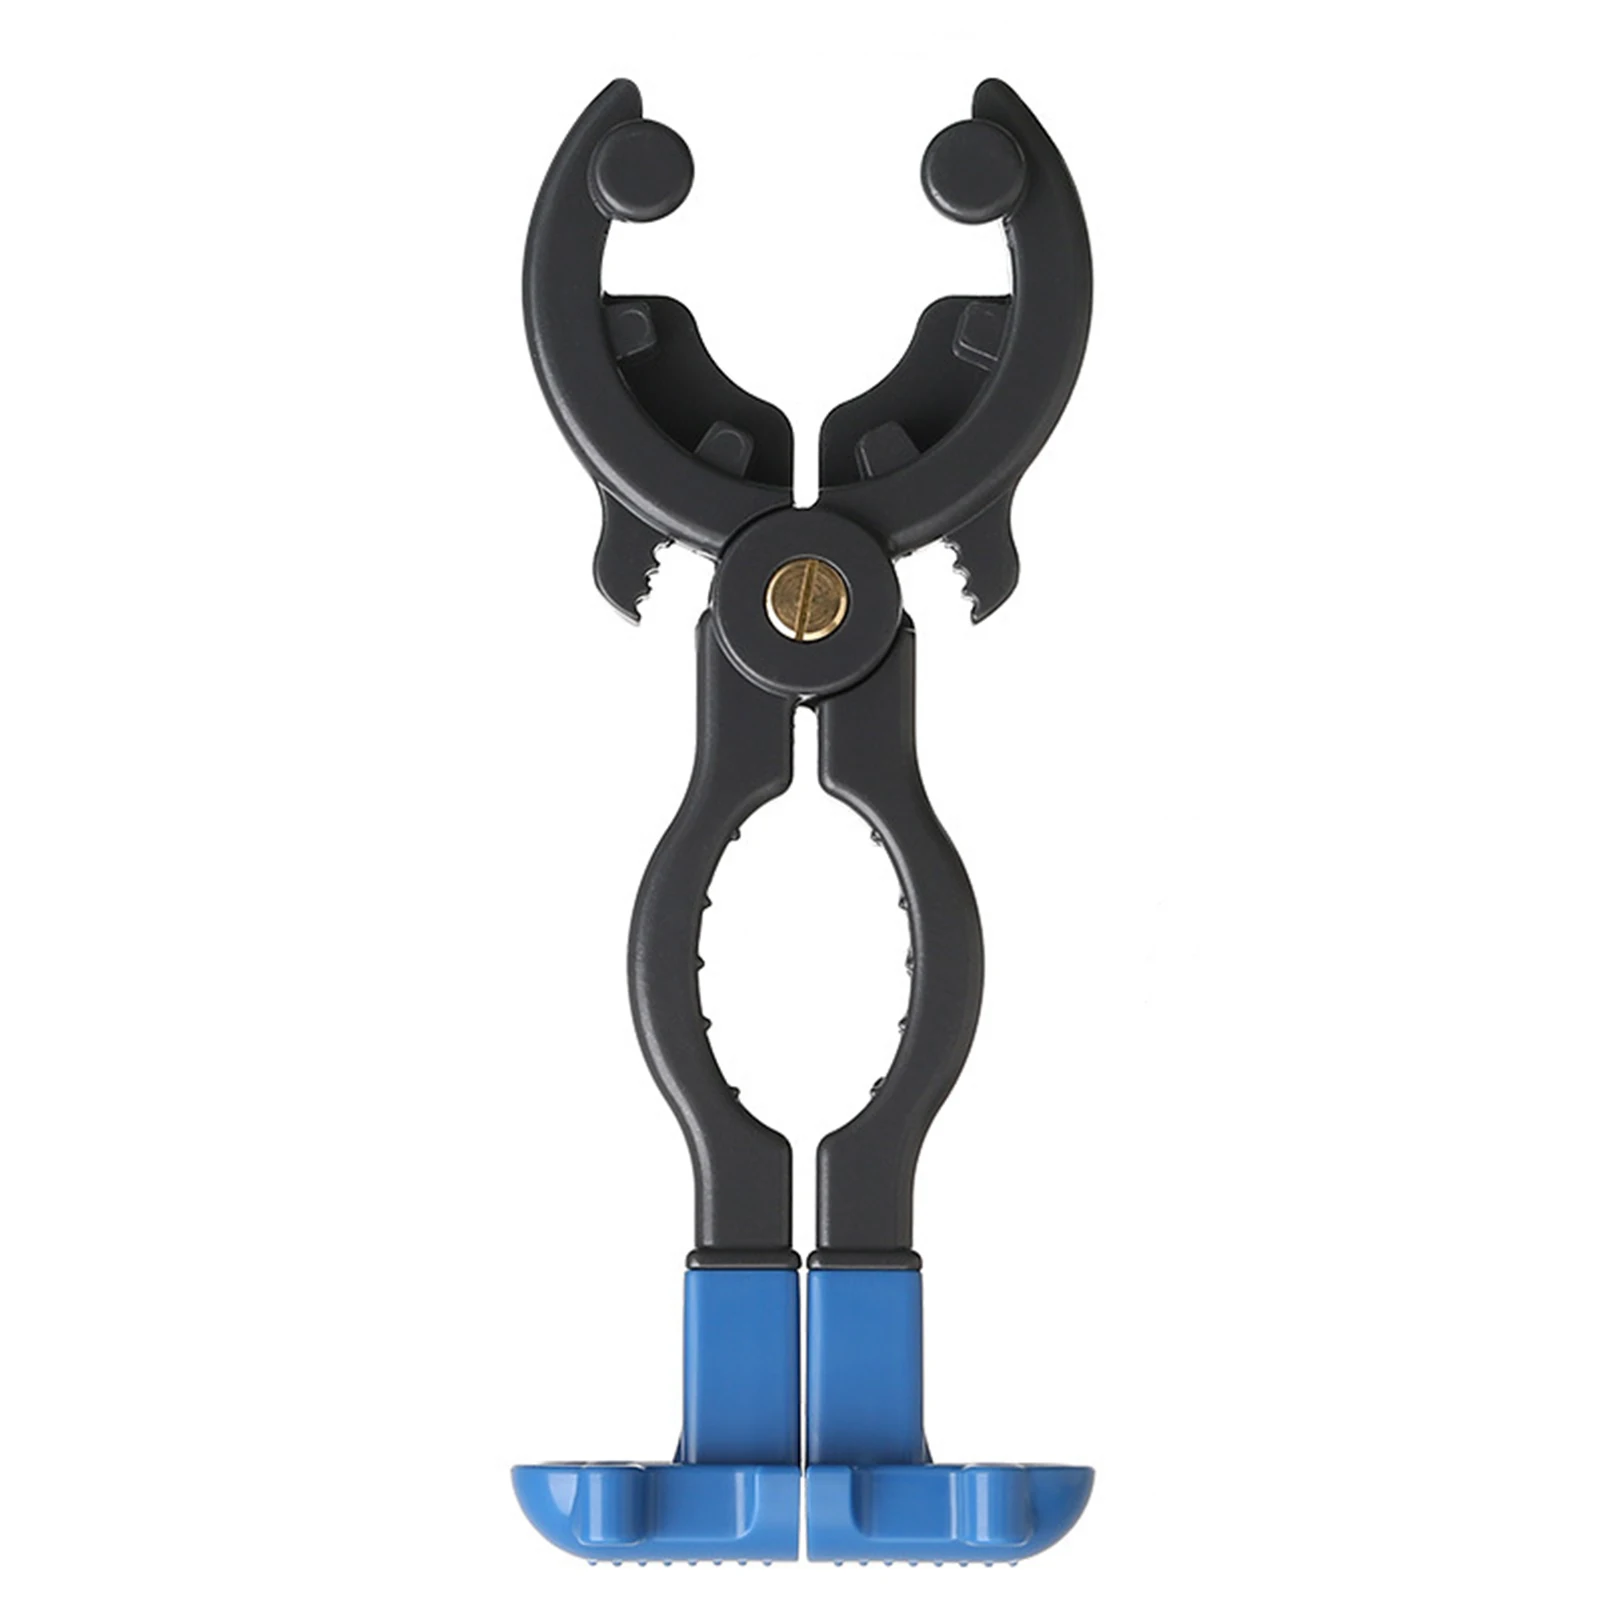 

Gases Tank Pressure Reducing Valves Door Wrench Labor-Saving Natural Liquefied Gases Dismantling Pliers For Opening Walnuts